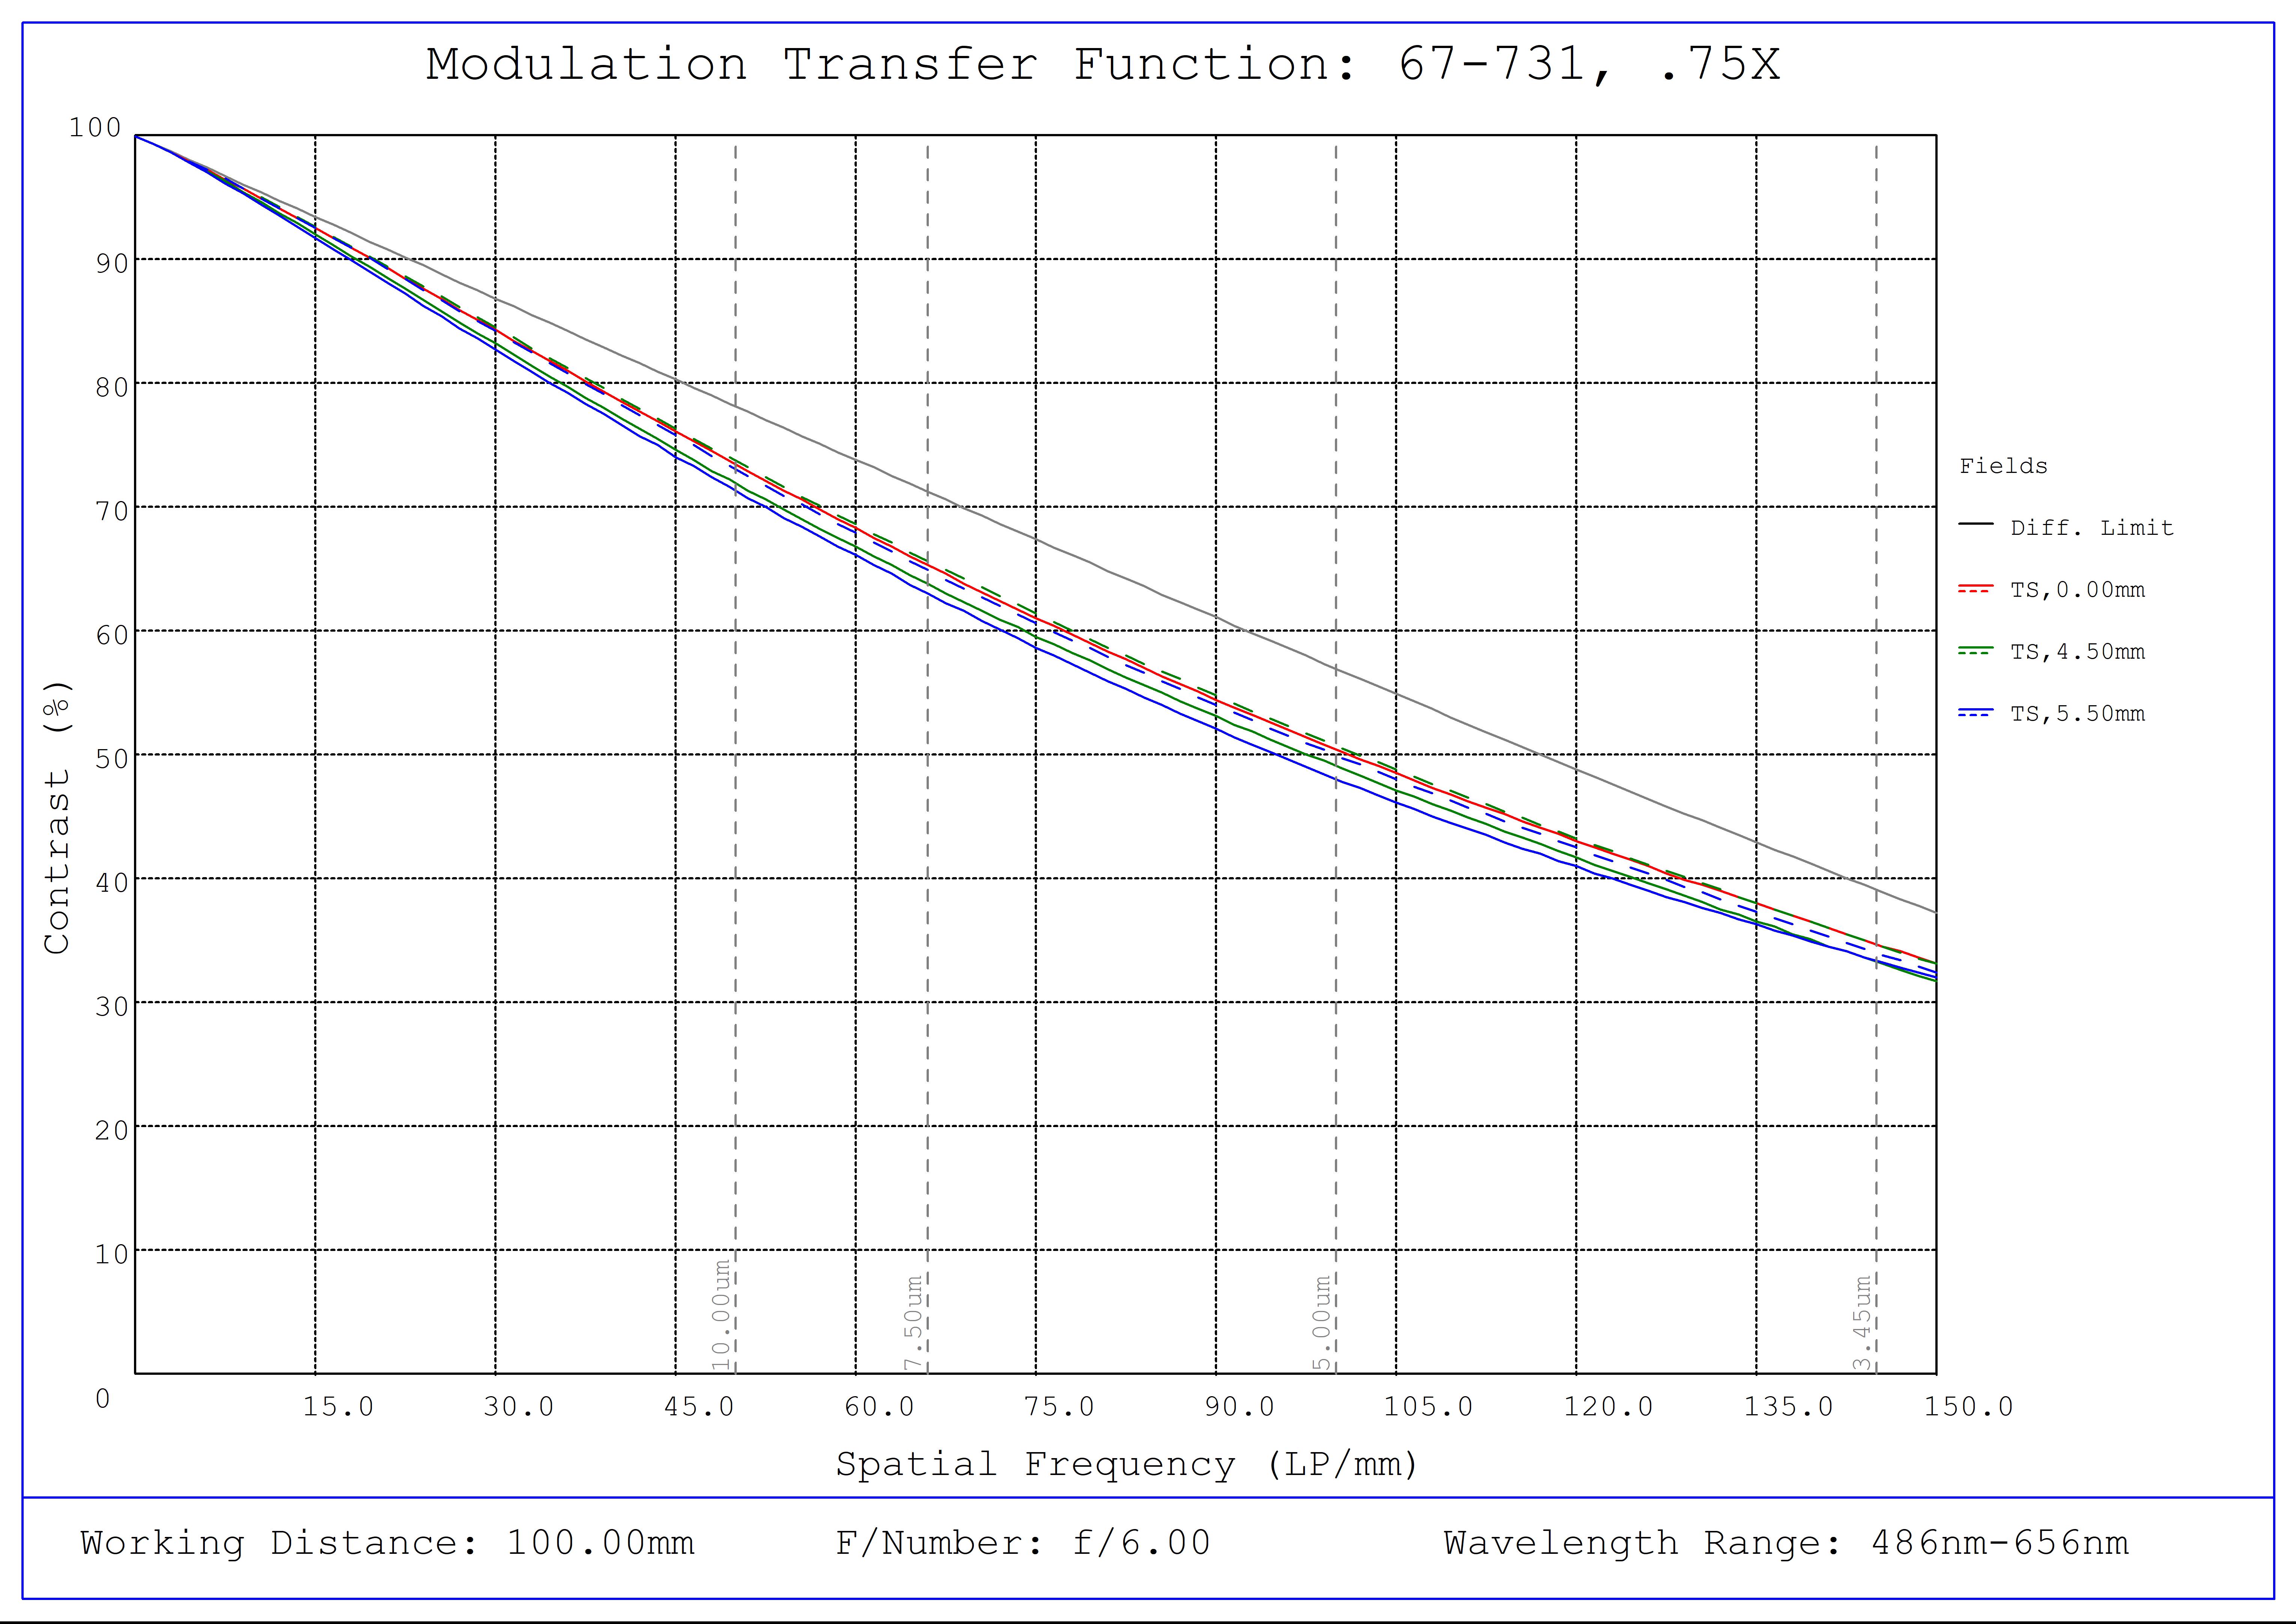 #67-731, 0.75X SilverTL™ Telecentric Lens, Modulated Transfer Function (MTF) Plot, 100mm Working Distance, f6